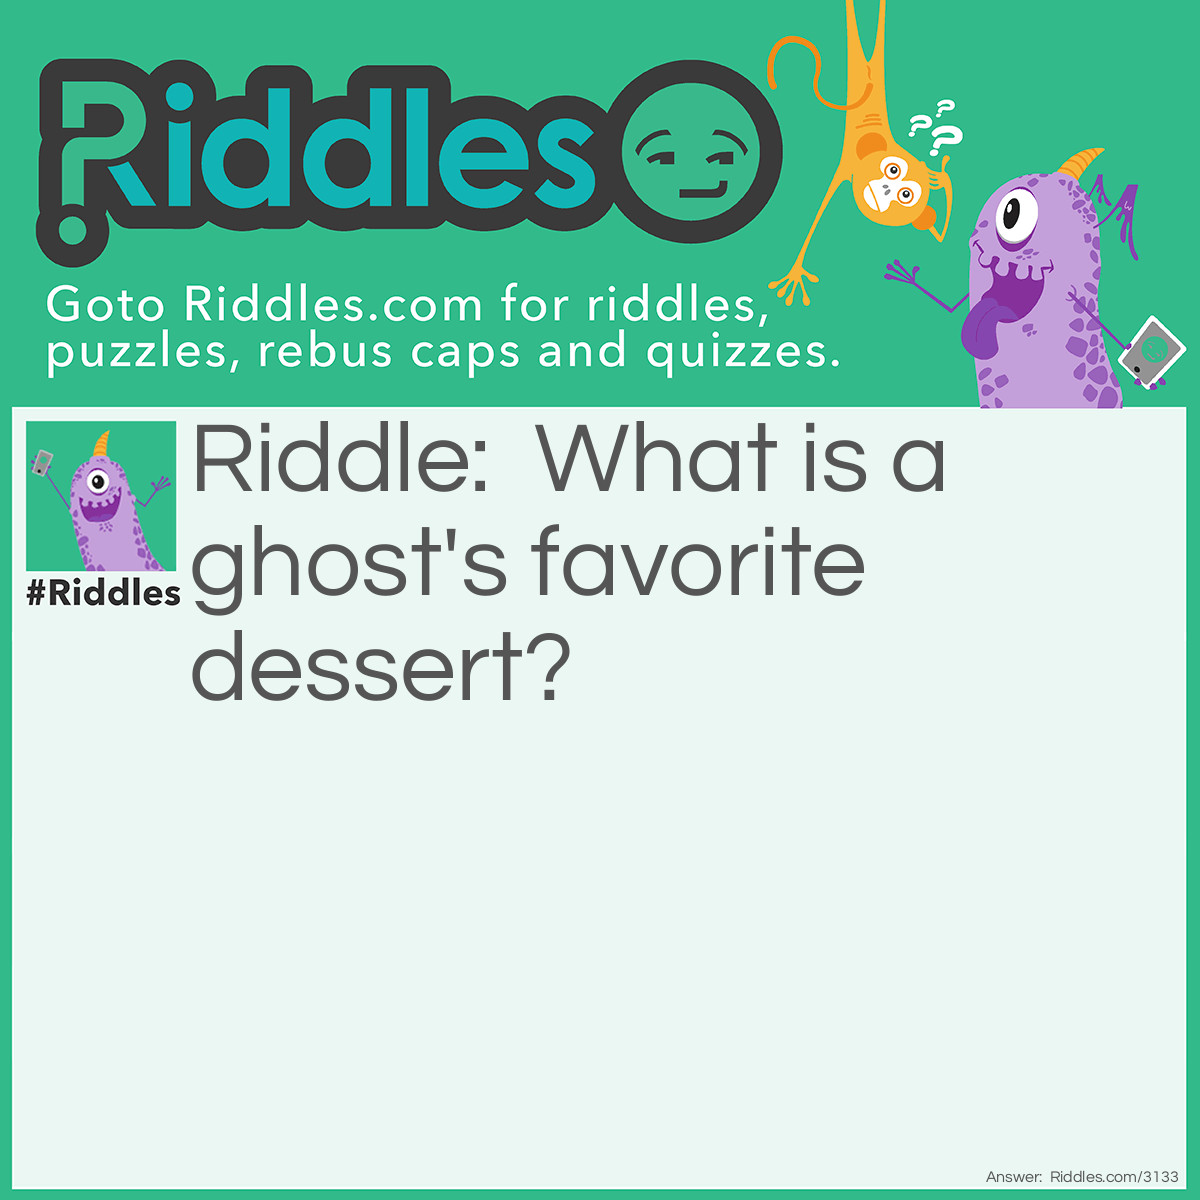 Riddle: What is a ghost's favorite dessert? Answer: Ice Scream.